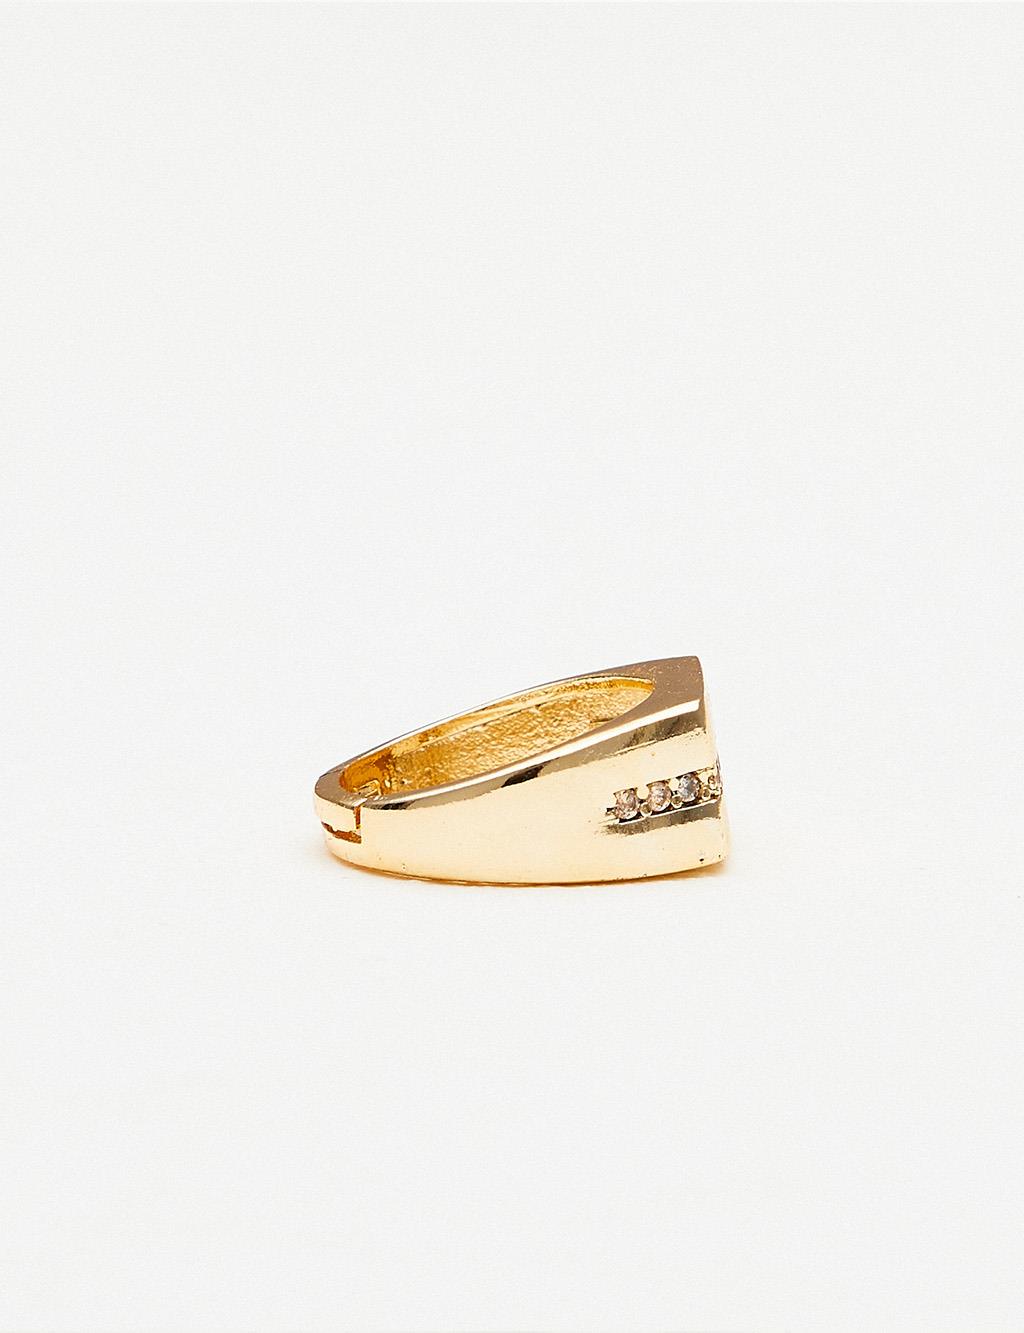 Stone Nut Ring Gold Color